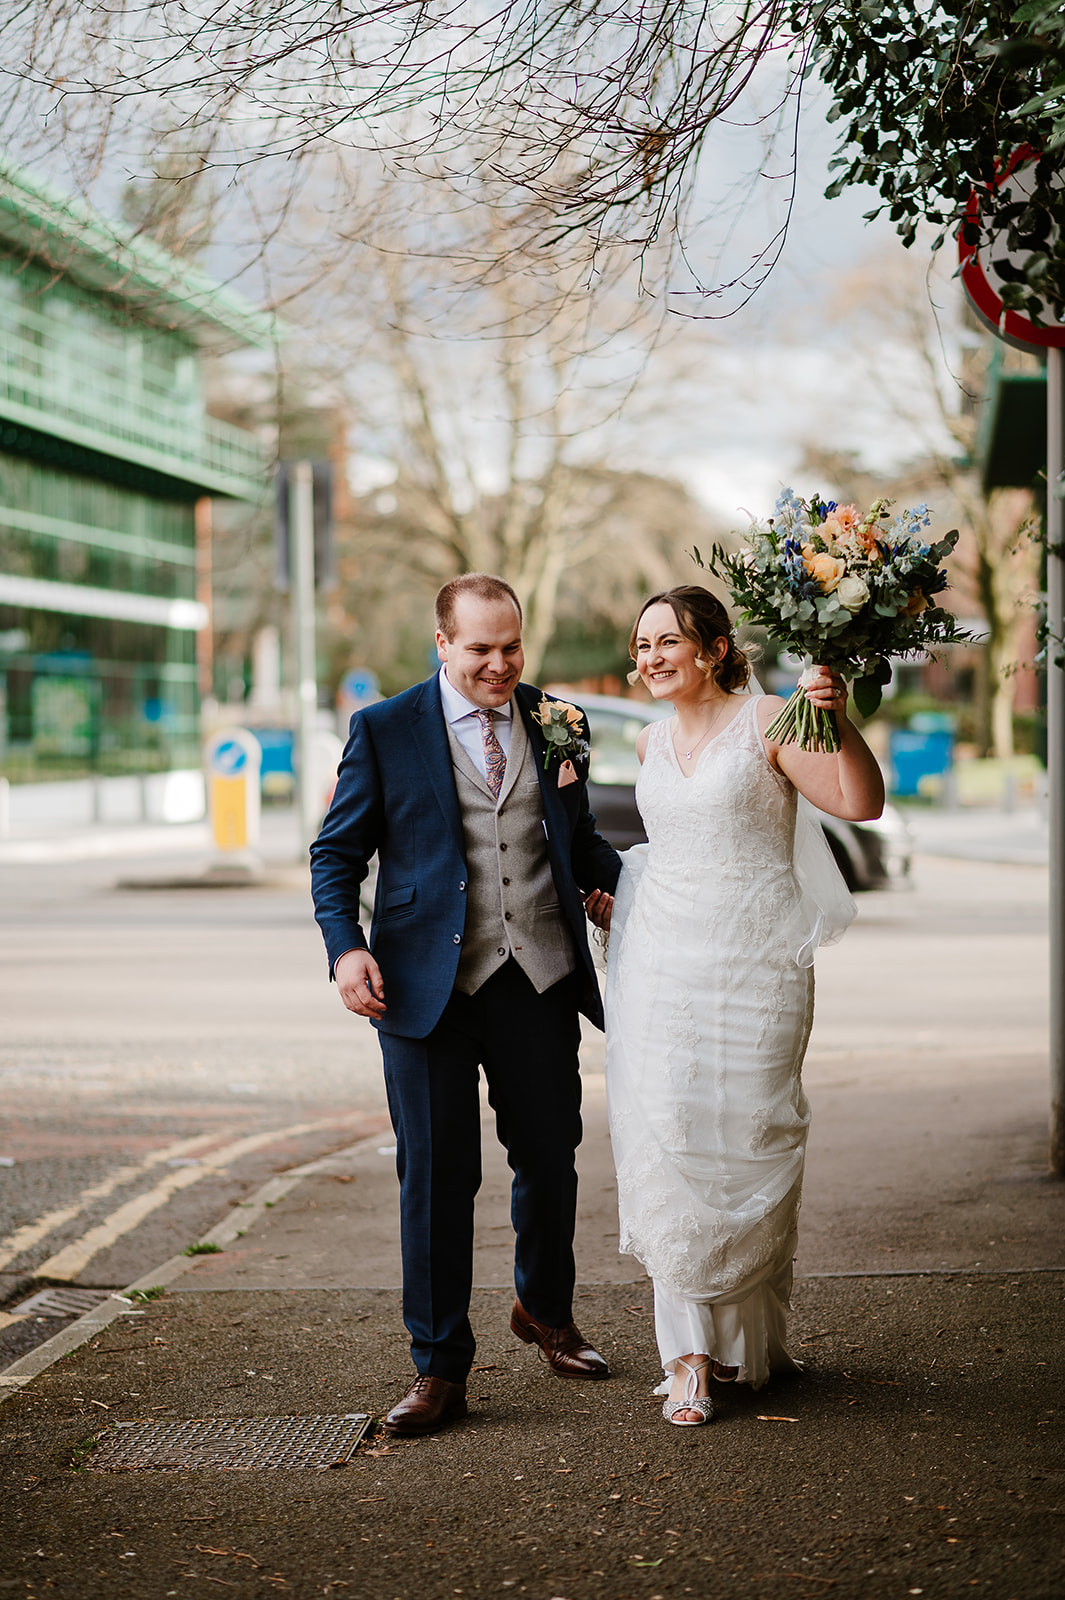 Bride and groom returning along the steet